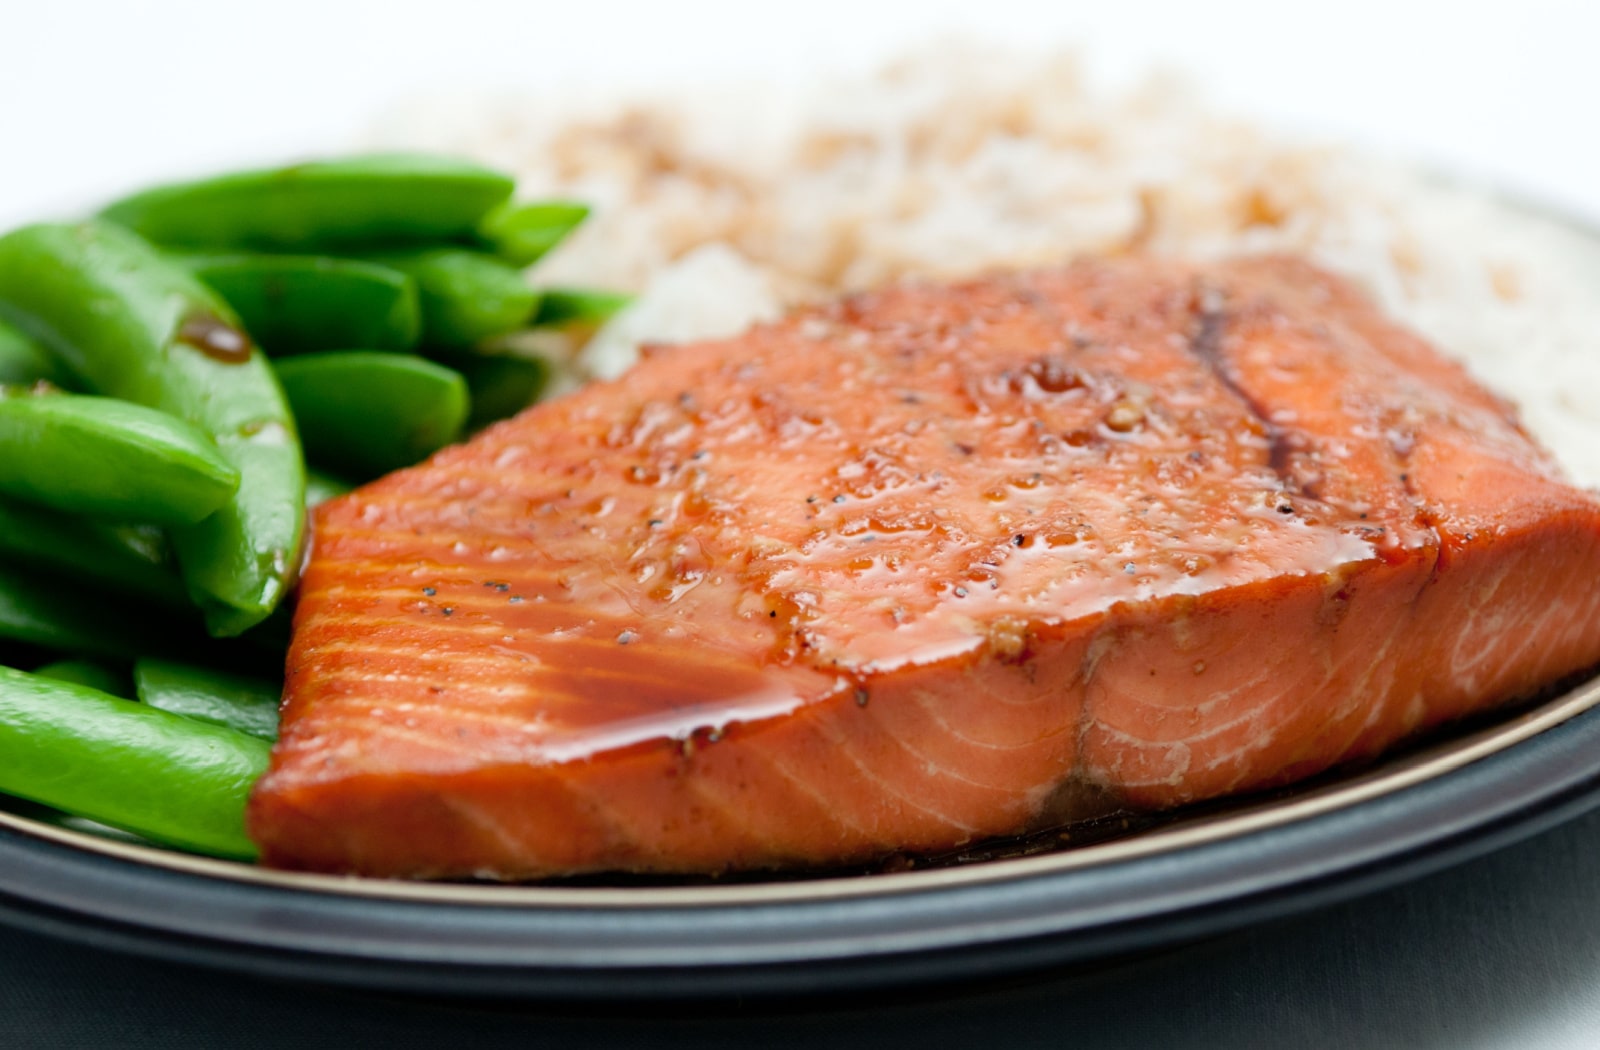 A maple glazed salmon on a plate with green beans and white rice